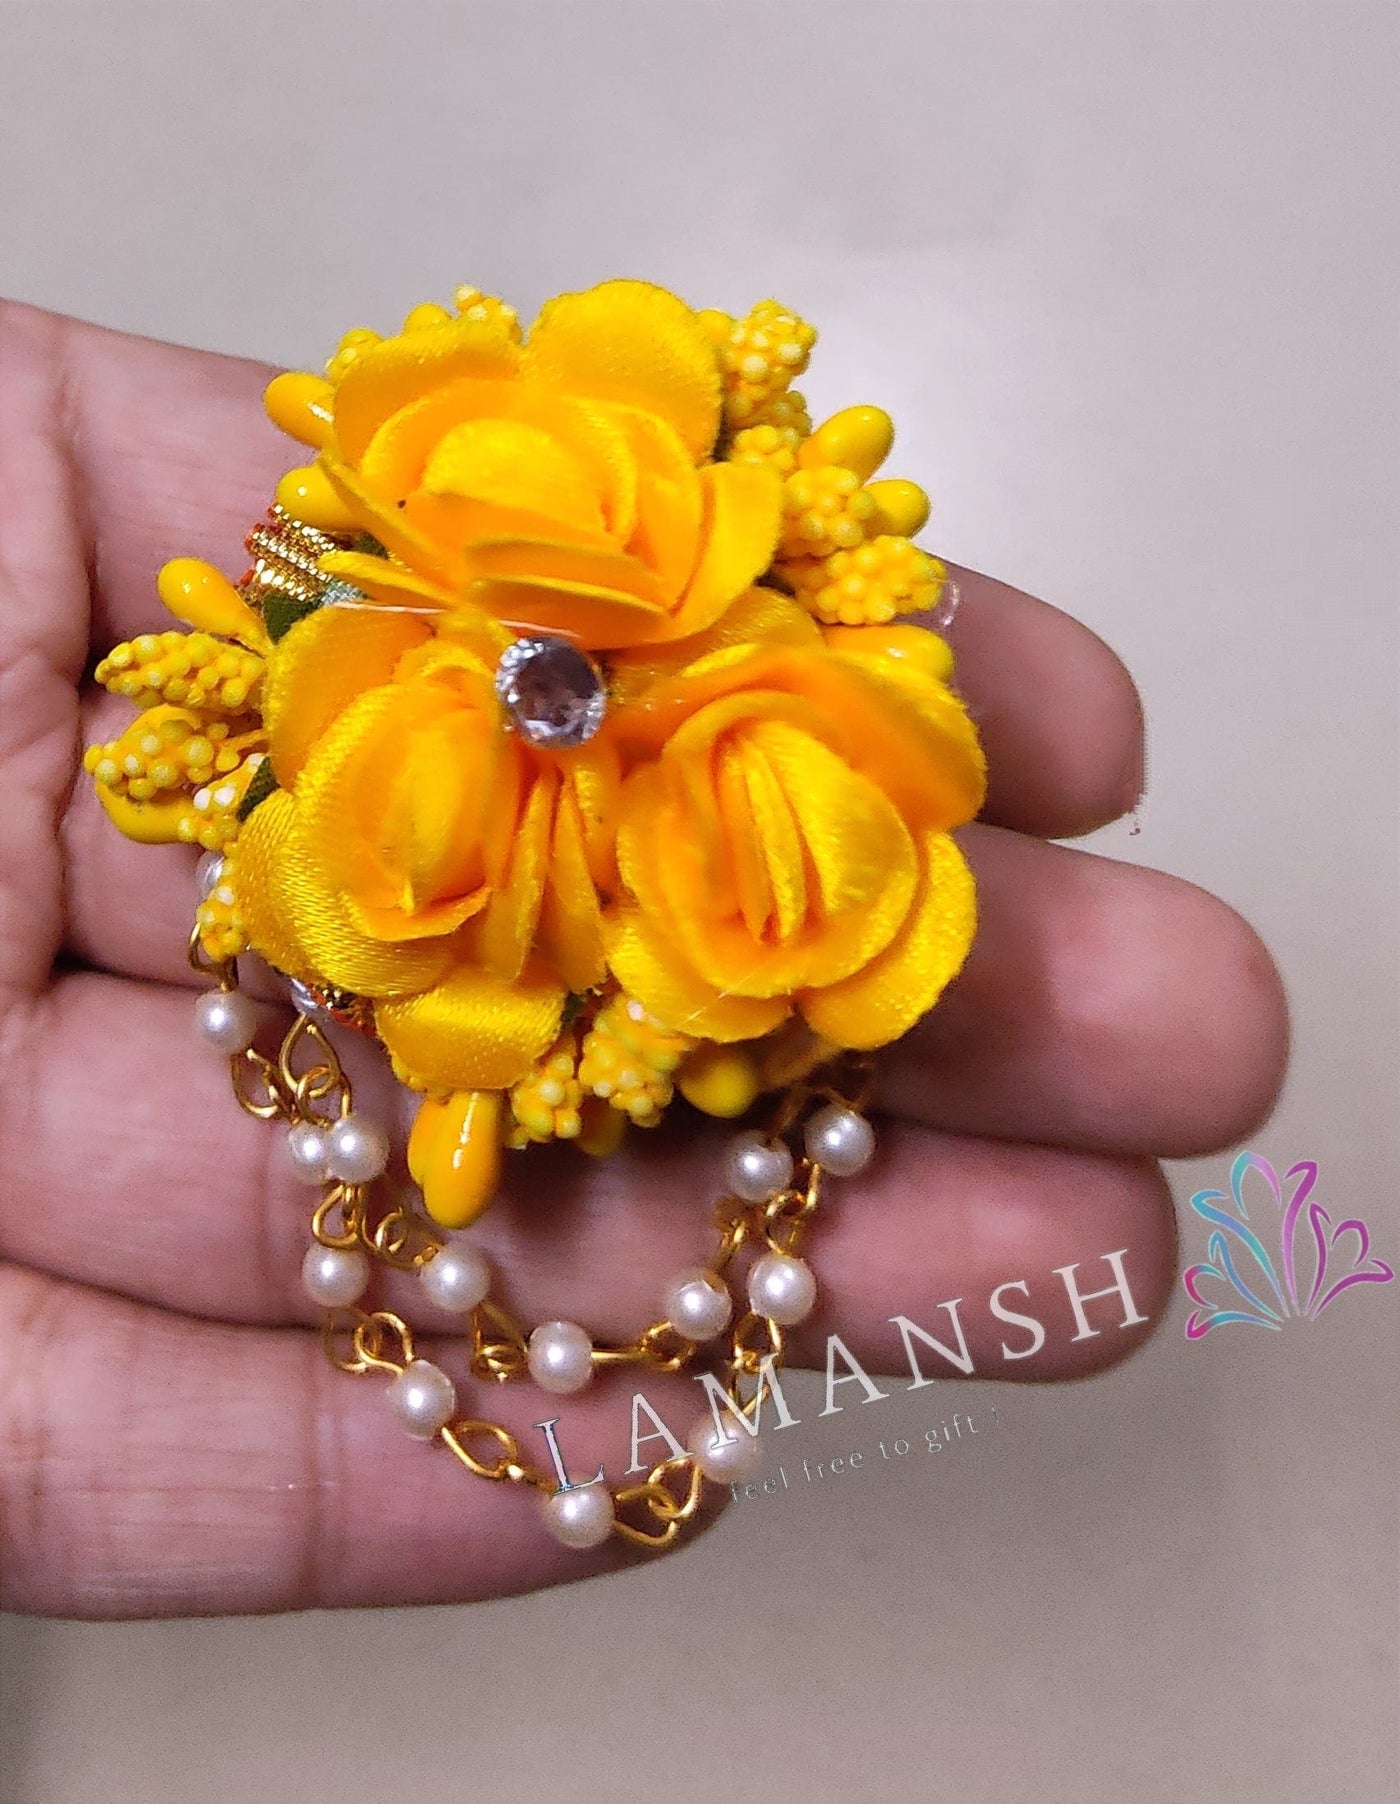 LAMANSH Floral 🌺 brooches LAMANSH® Yellow Fabric Flower Brooches 💛 for Guests in Wedding & other events / Bridesmaid Giveaways Favours ✨ for haldi mehendi sangeet